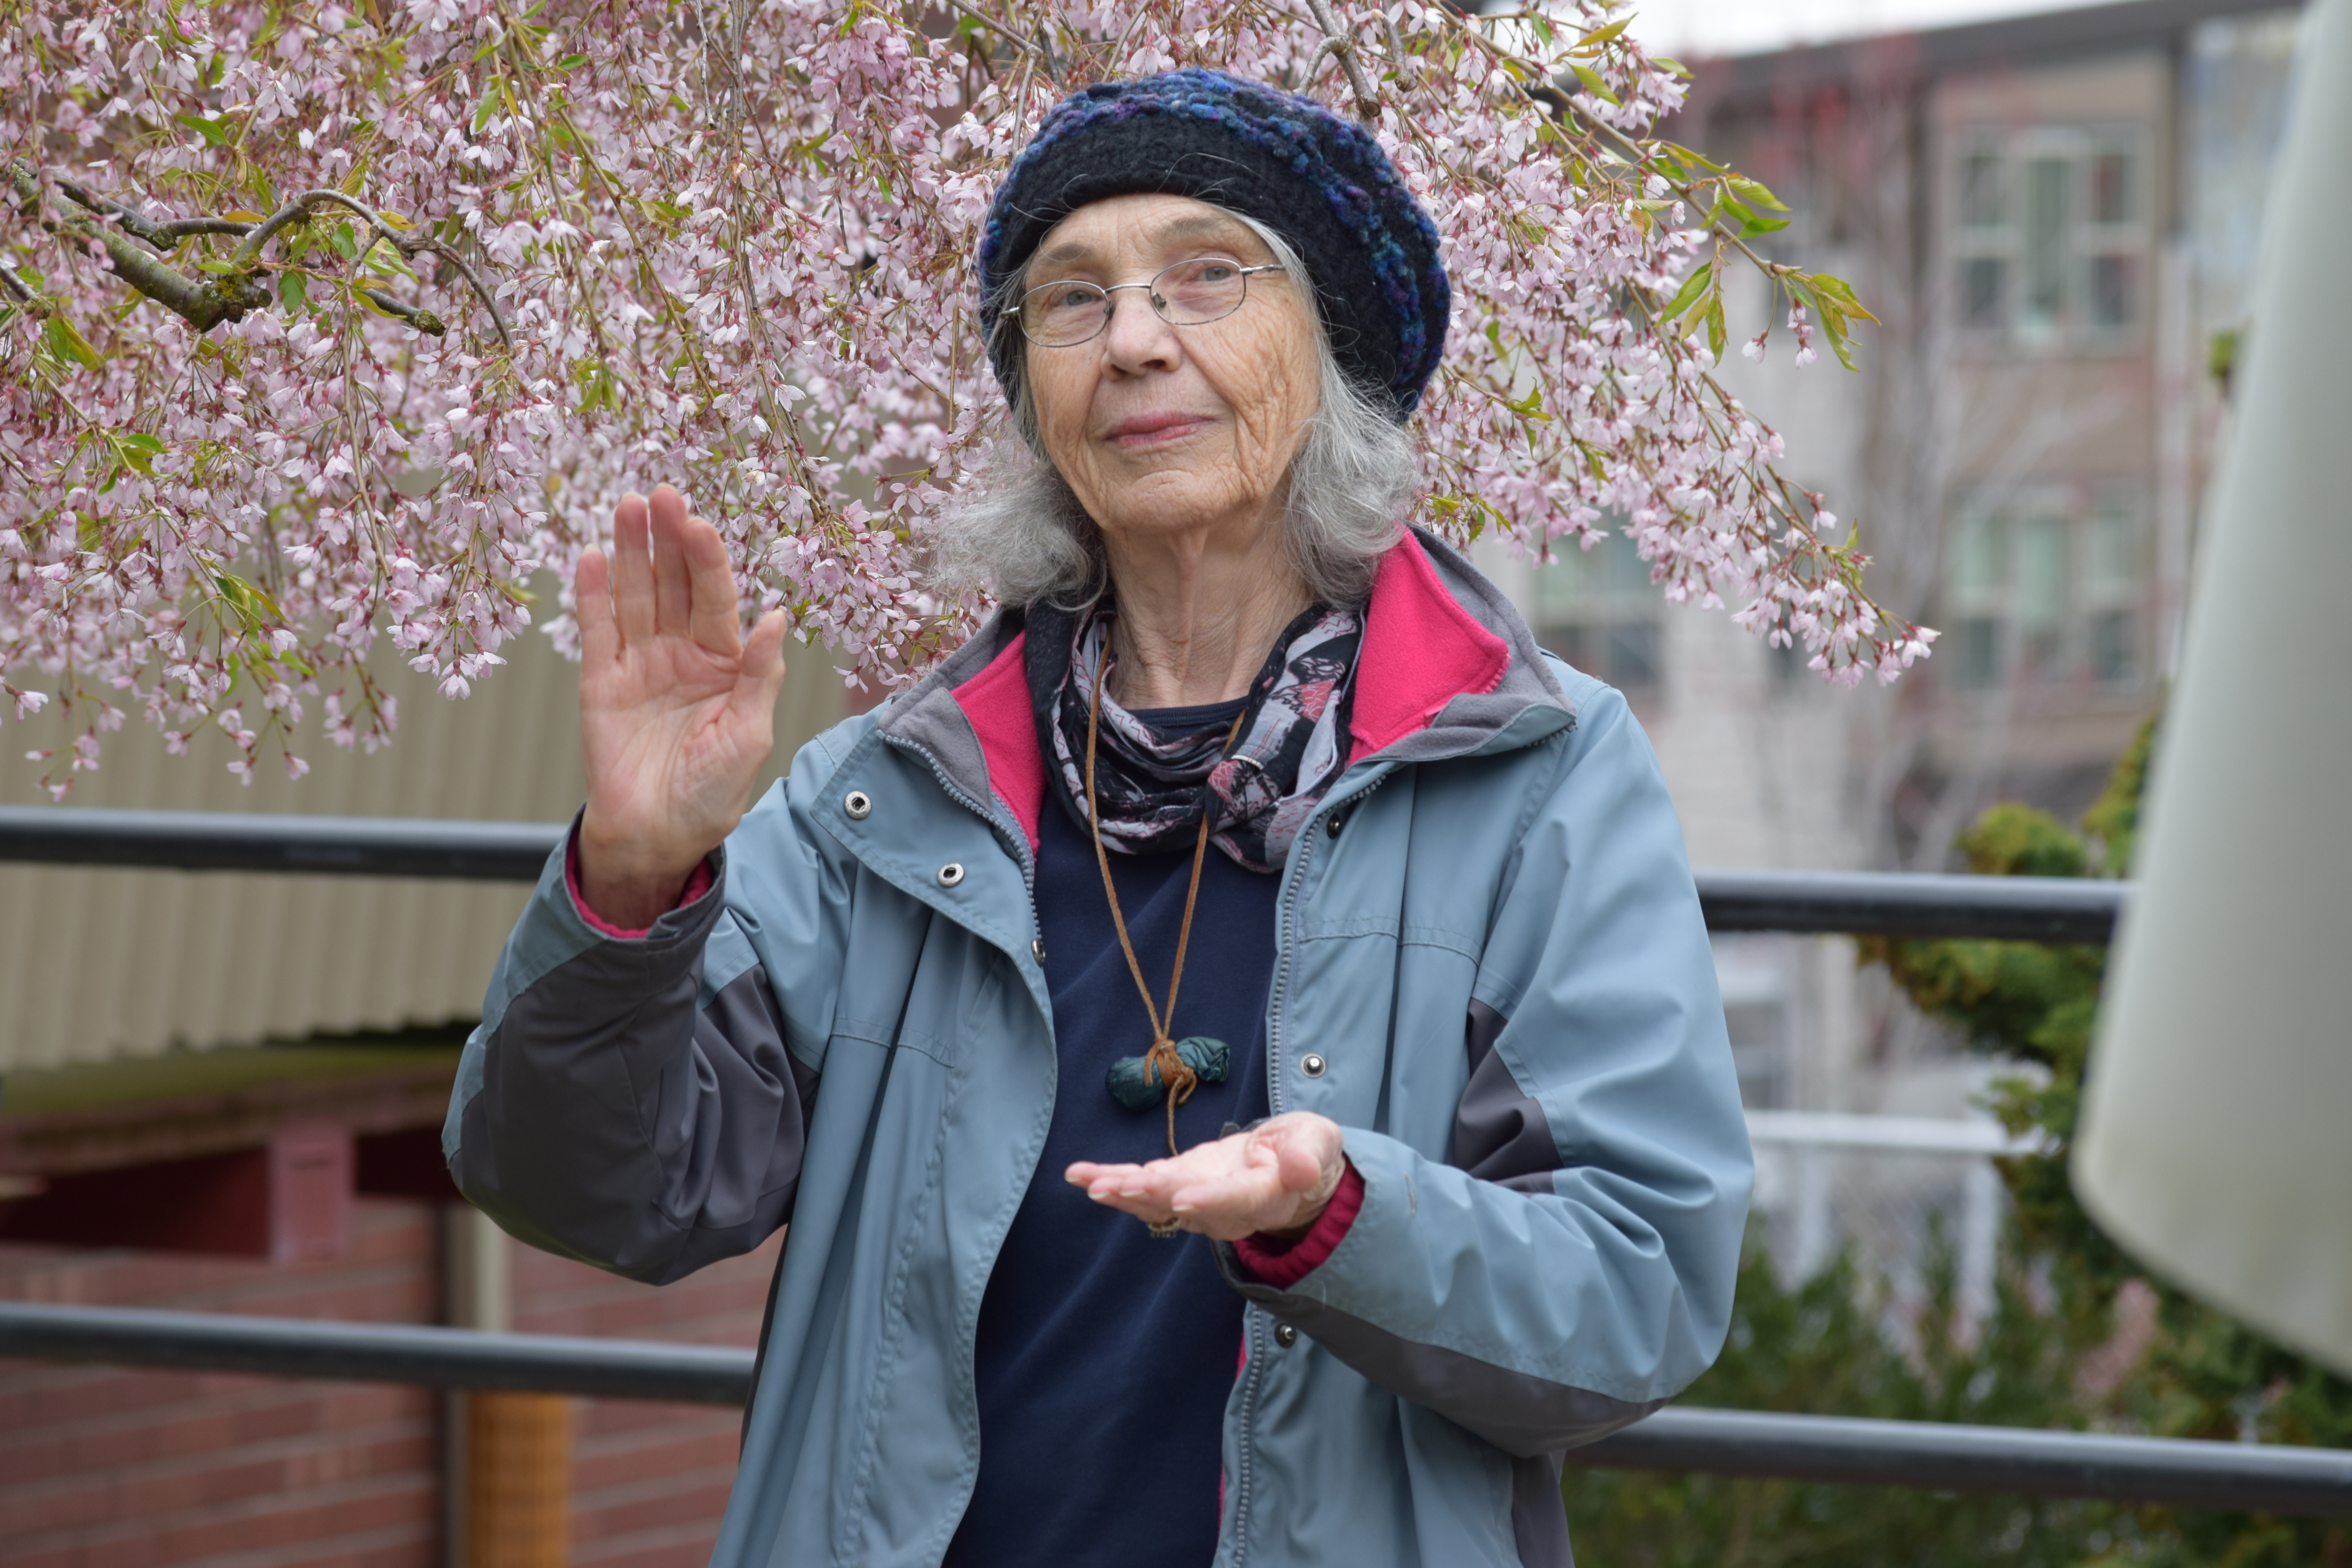 Ellen Murphy illustrating the two hands of nonviolence. photo: C.J. Pace